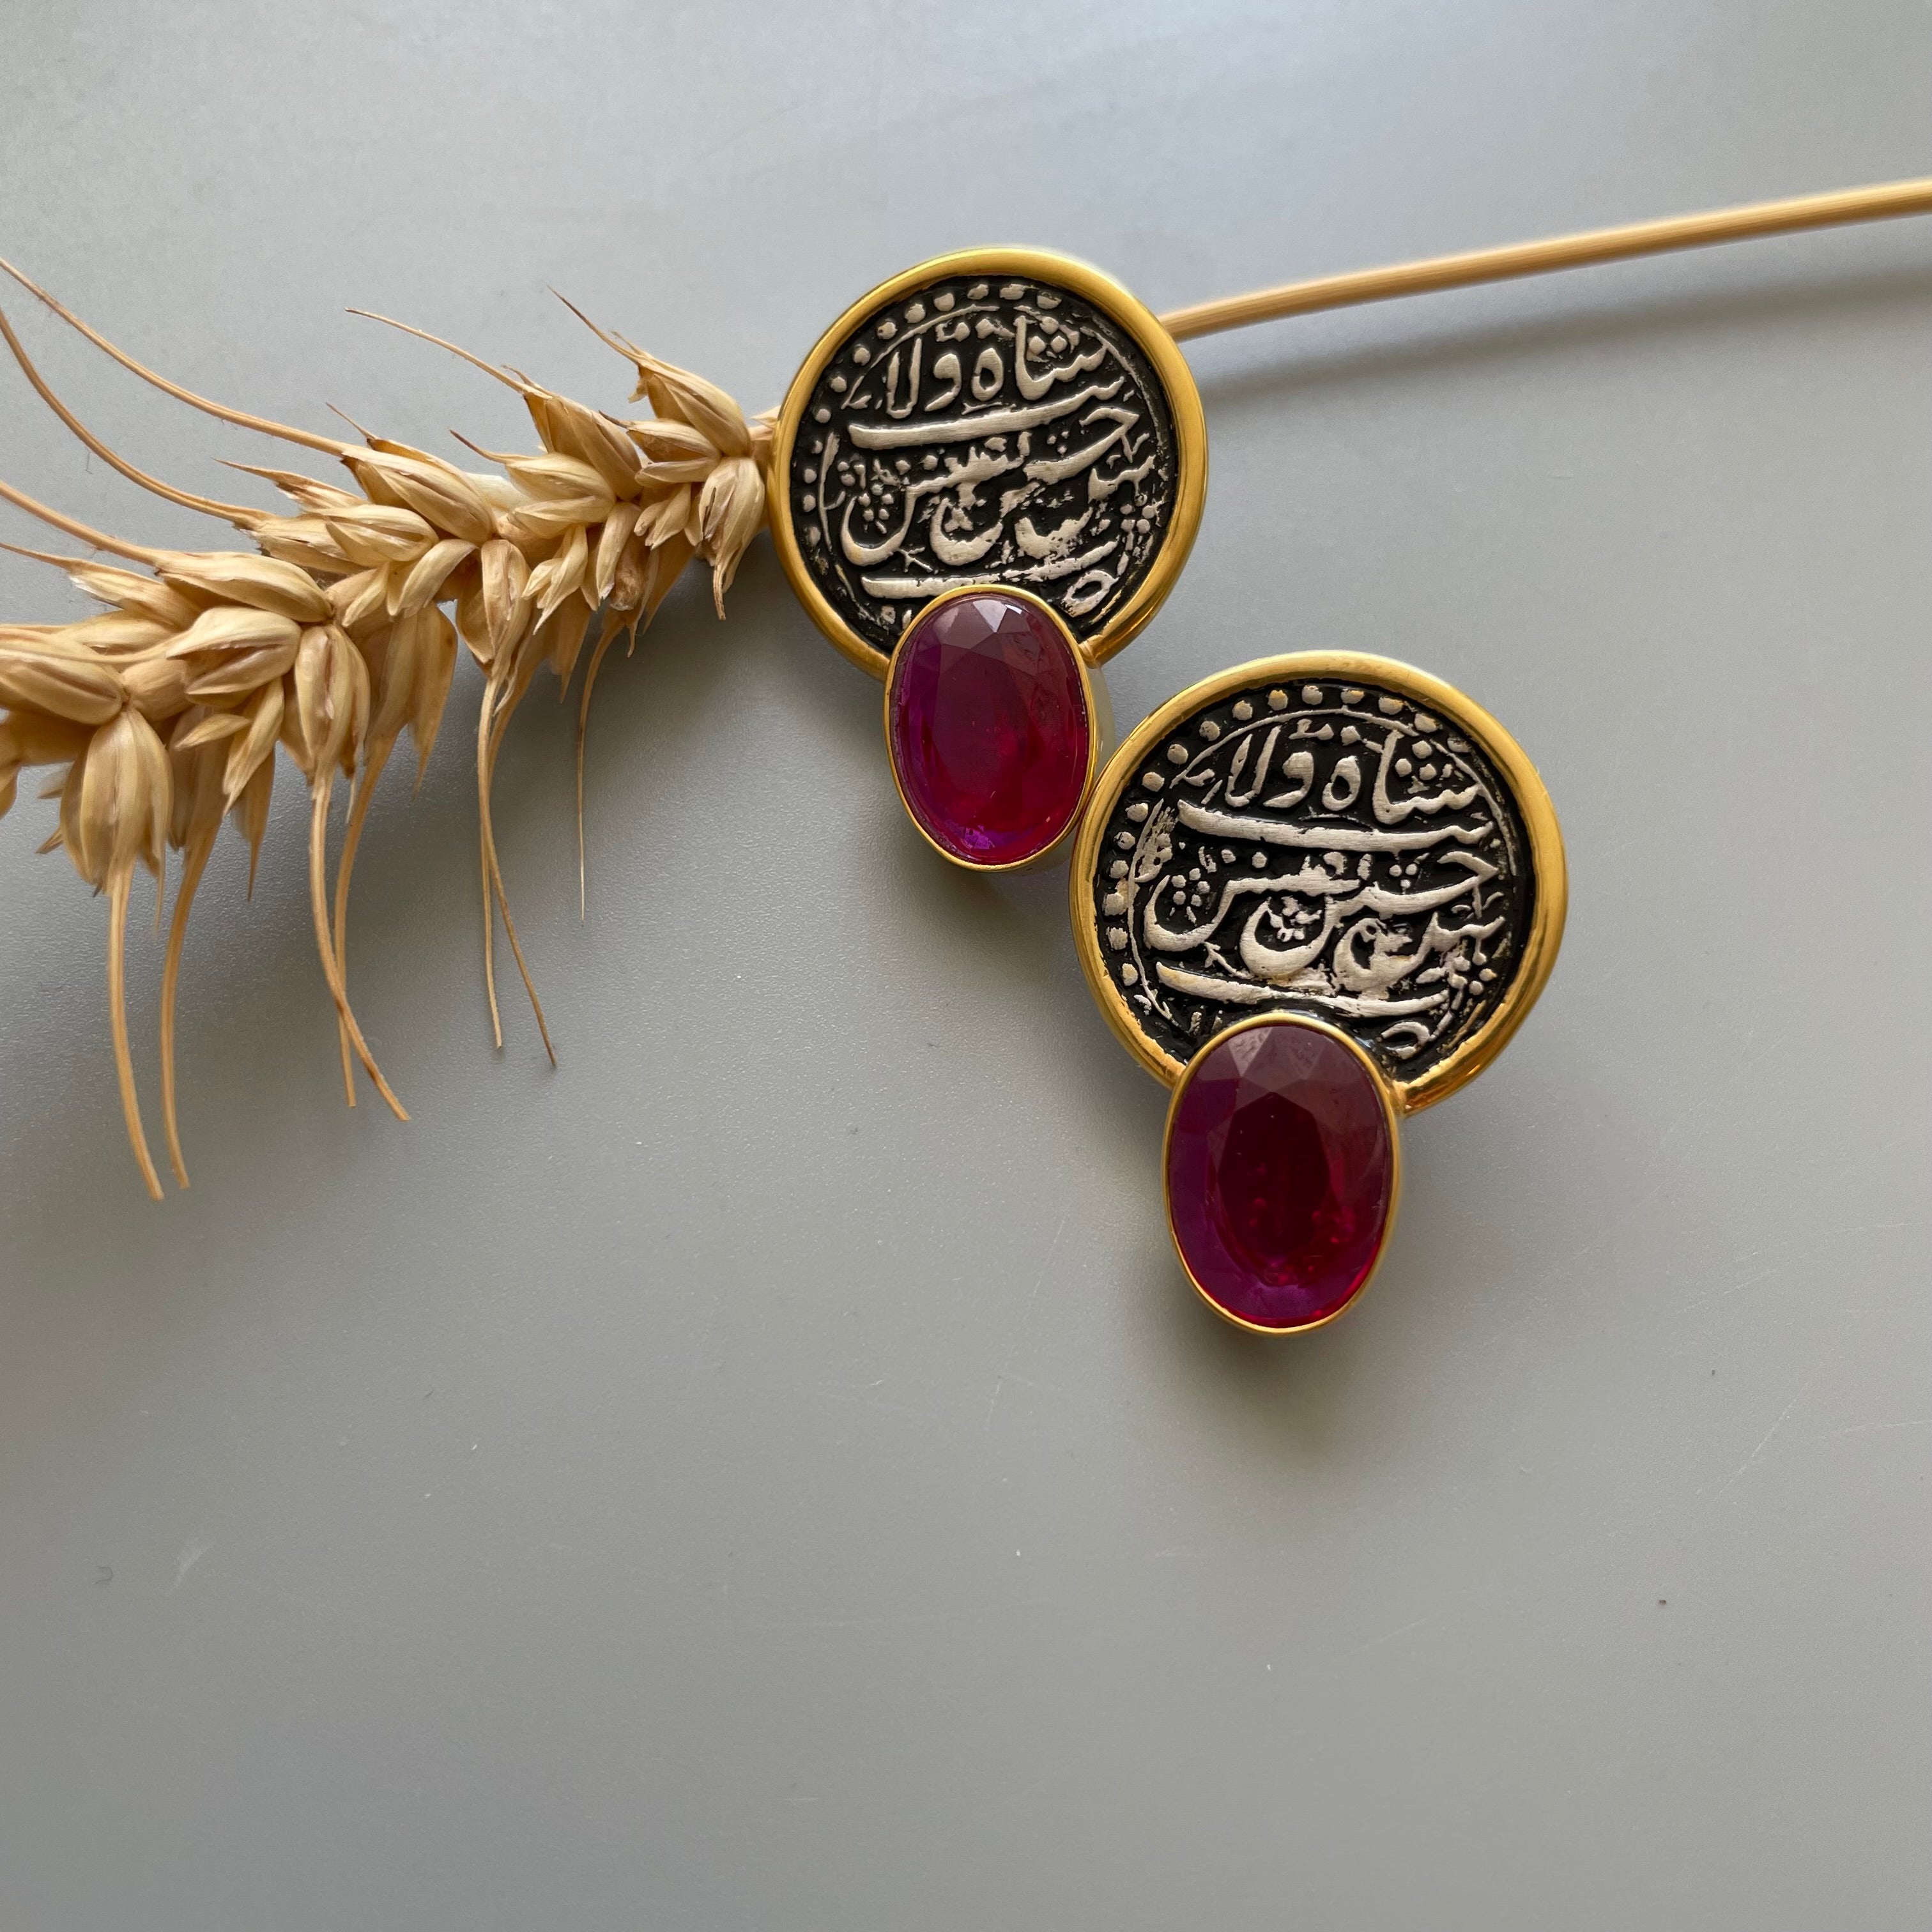 Handmade Silver Earrings with Persian Coin and Red Wine Crystal